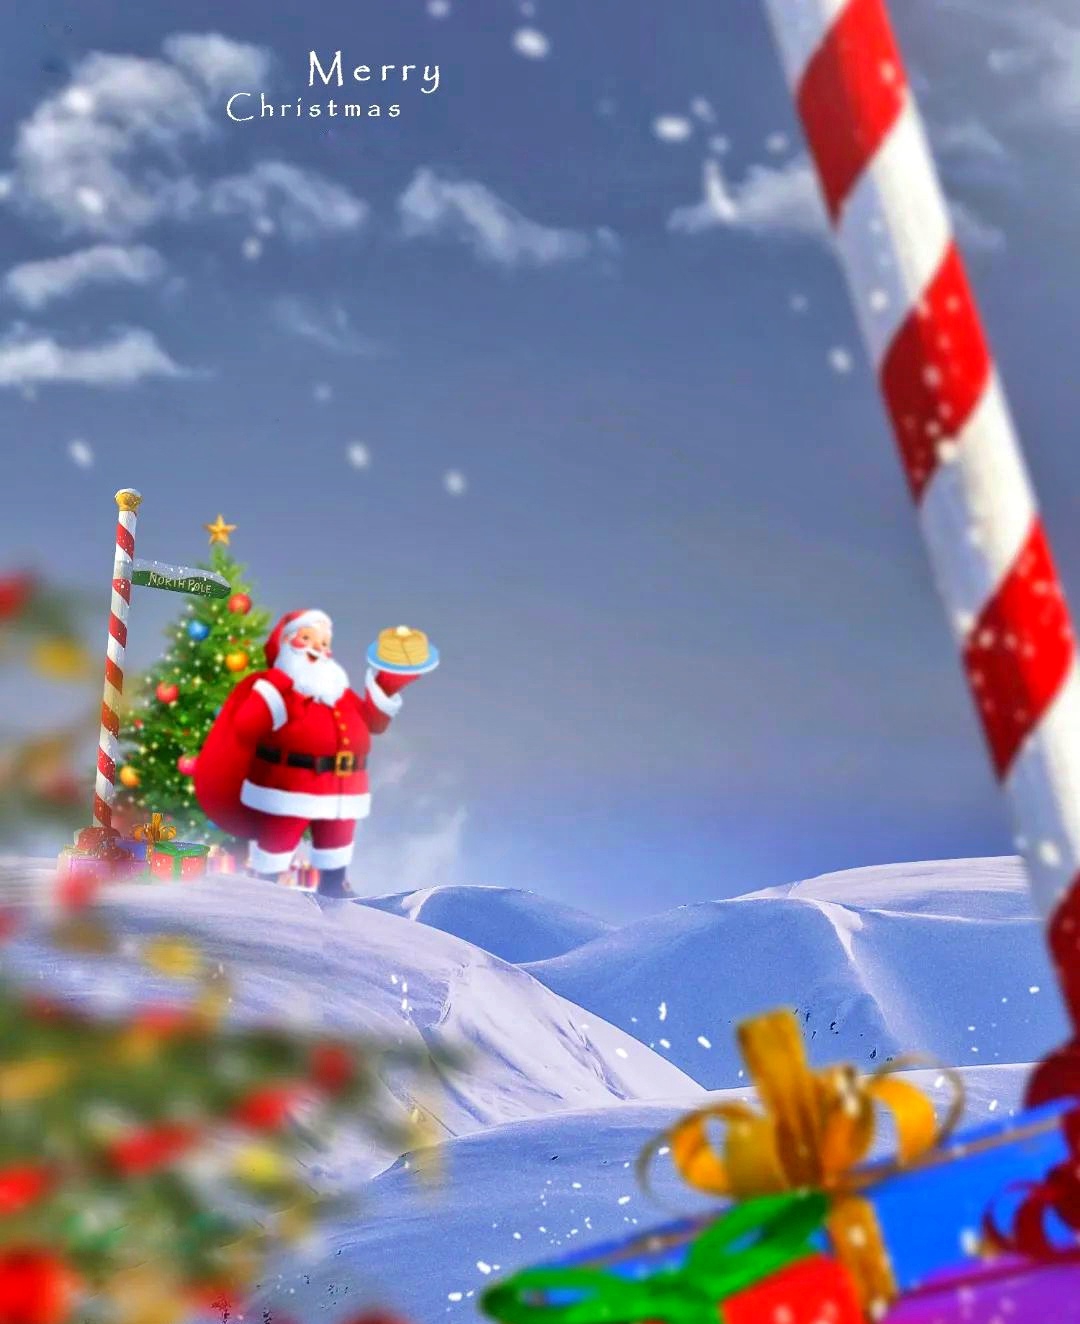 Merry Christmas Photo Background HD Image 